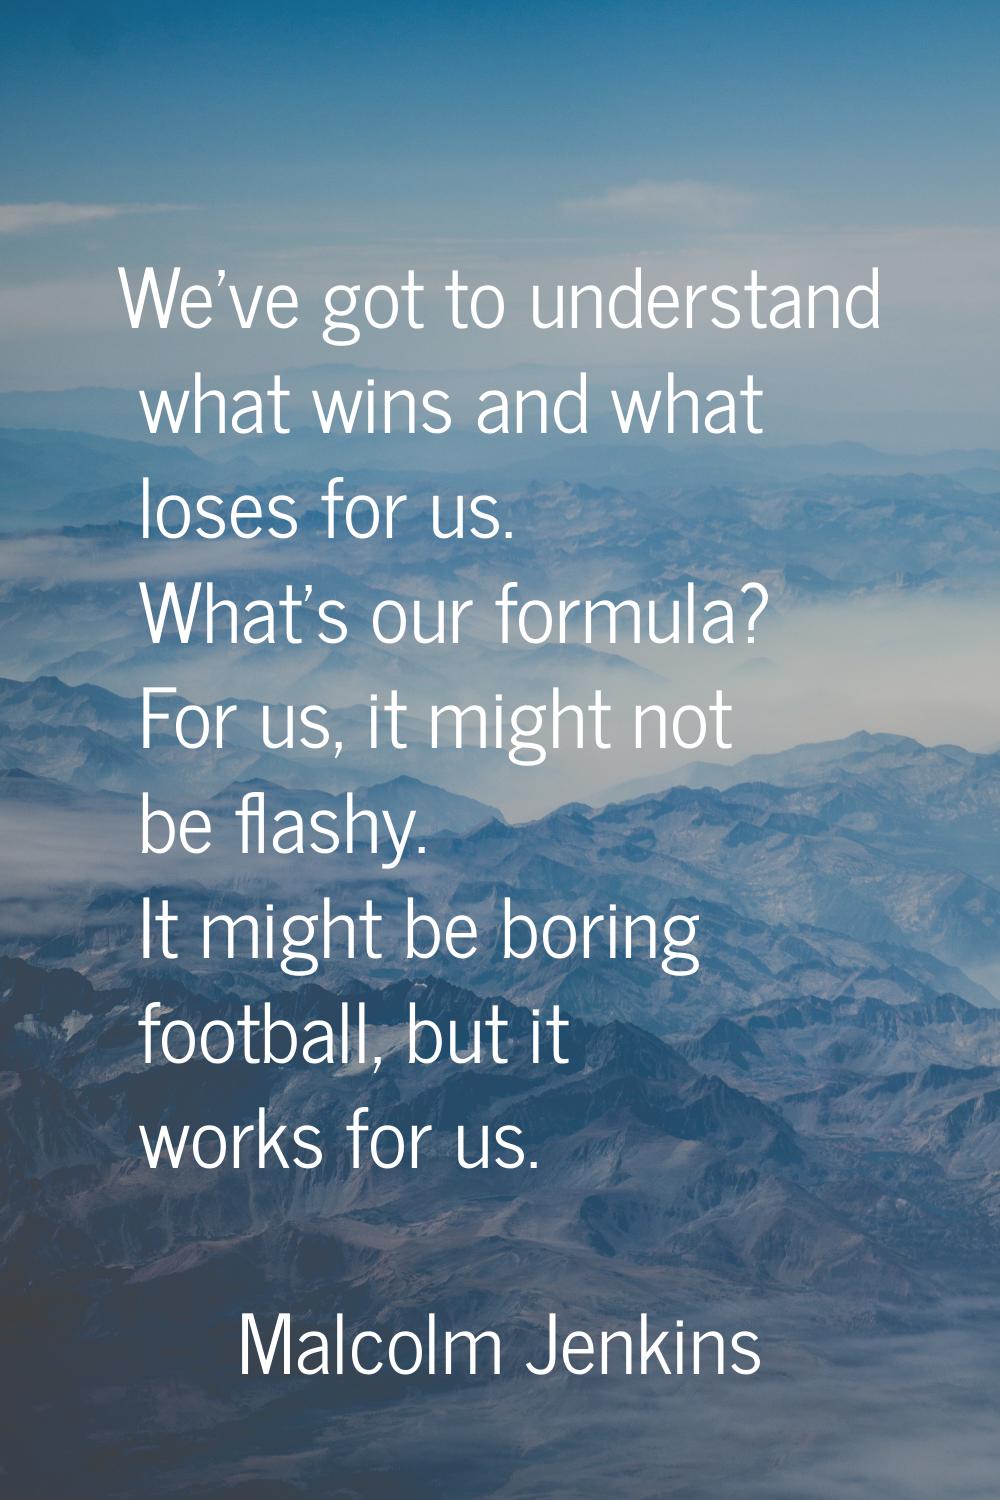 We've got to understand what wins and what loses for us. What's our formula? For us, it might not b